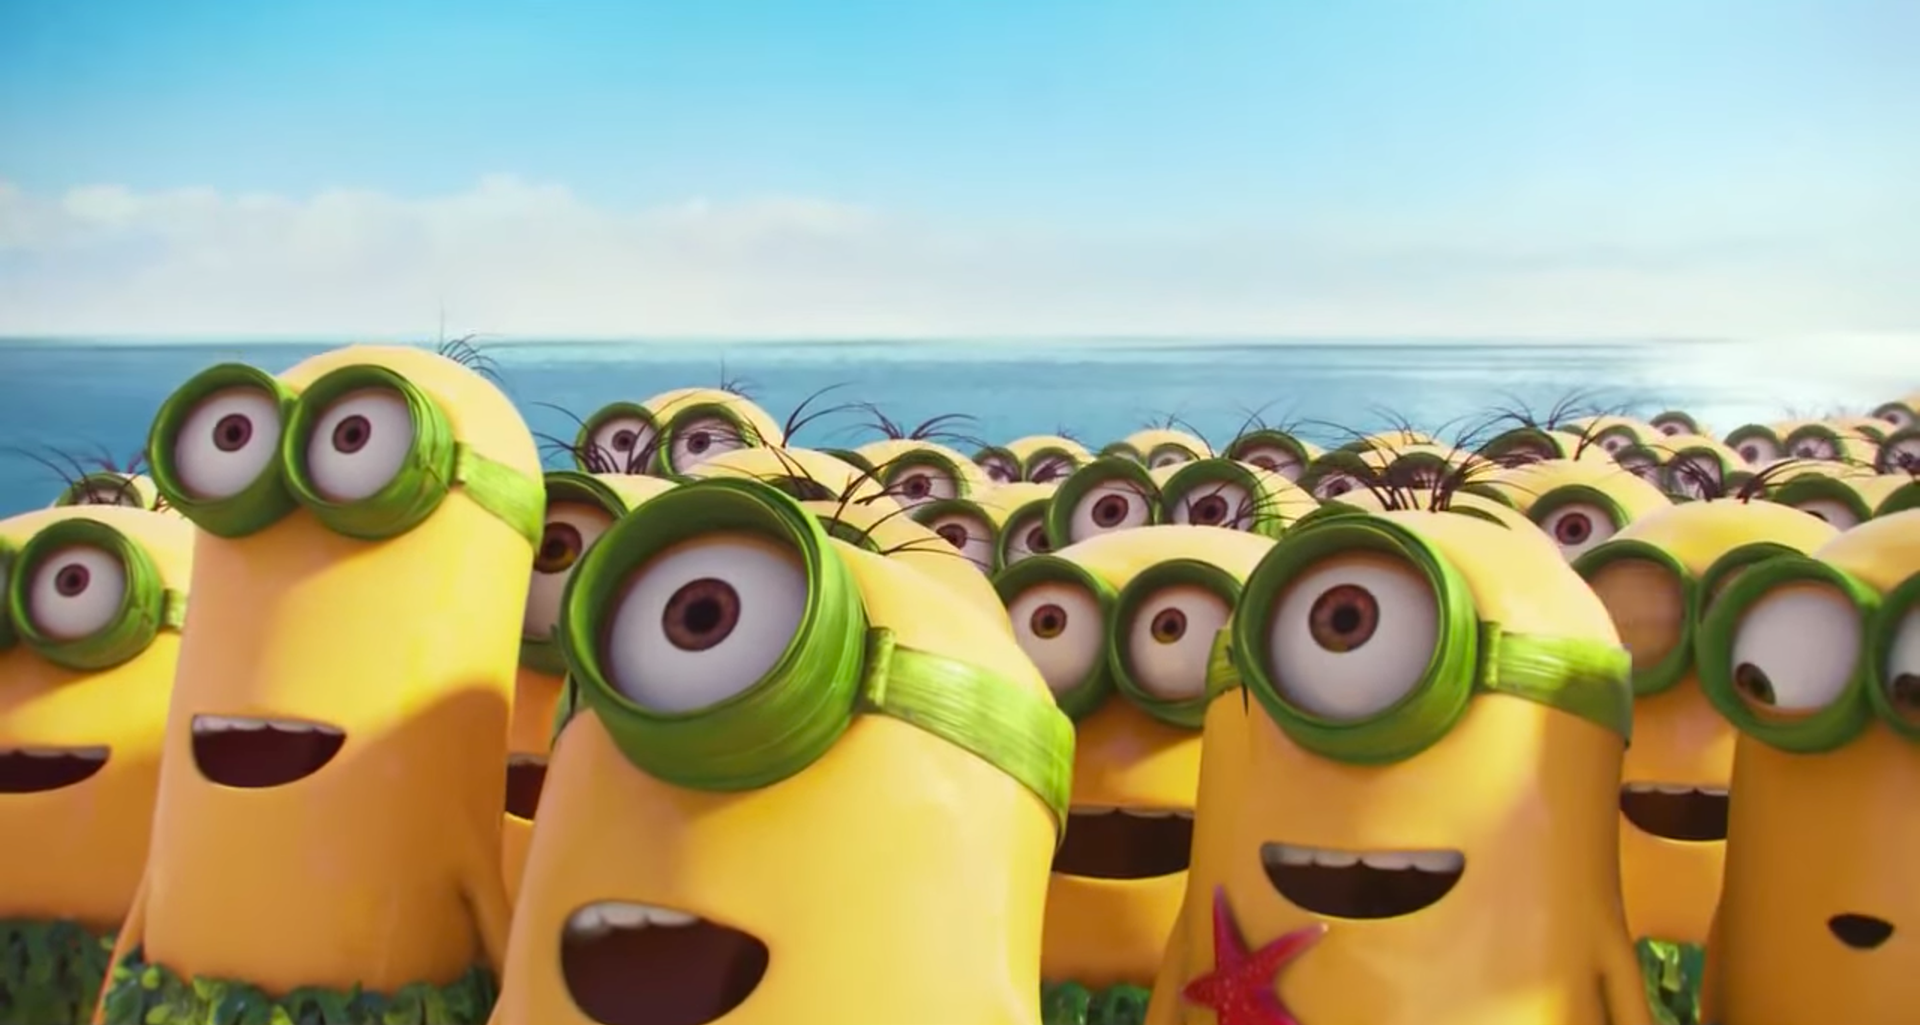 Minions Movie Wallpaper HD Background Of Your Choice